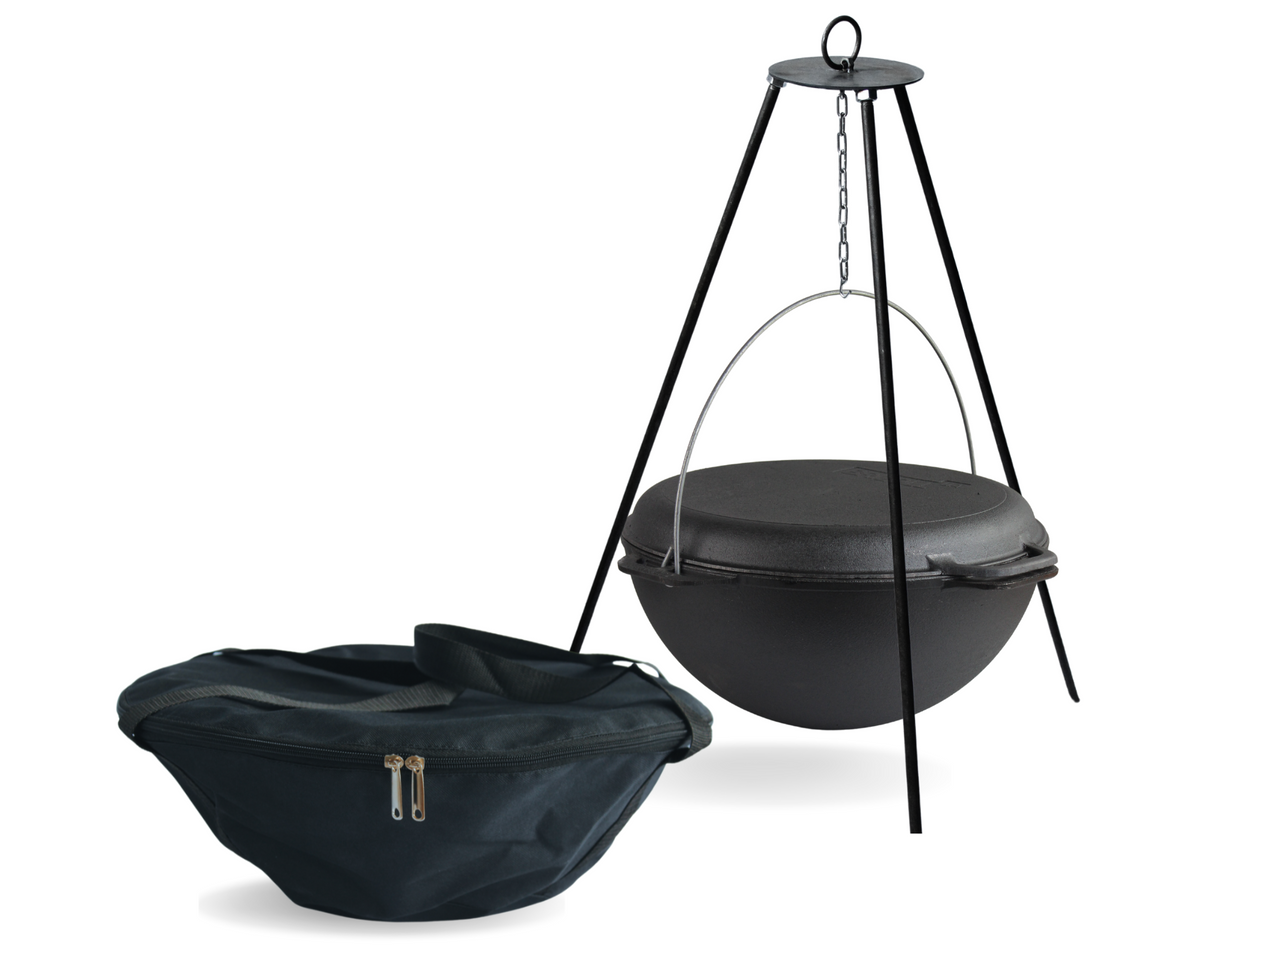 Cast iron asian cauldron 12 L WITH A GRILL LID-FRYING PAN, a bag and a tripod